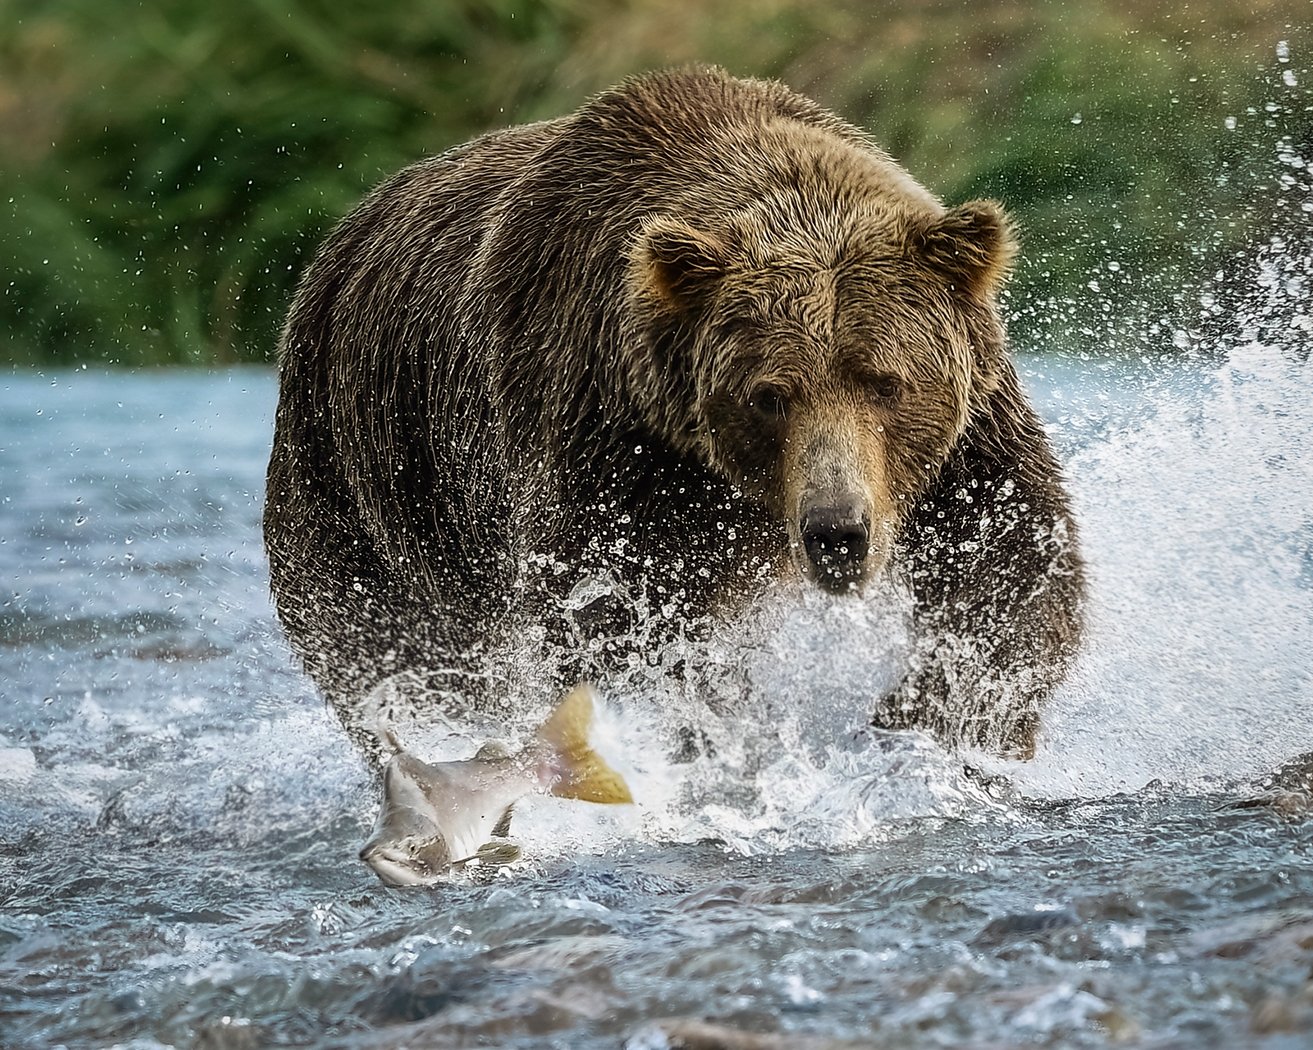 Grizzly Chasing Salmon,	Marilyn	Graham, Cowtown Camera Club, 3rd  Place